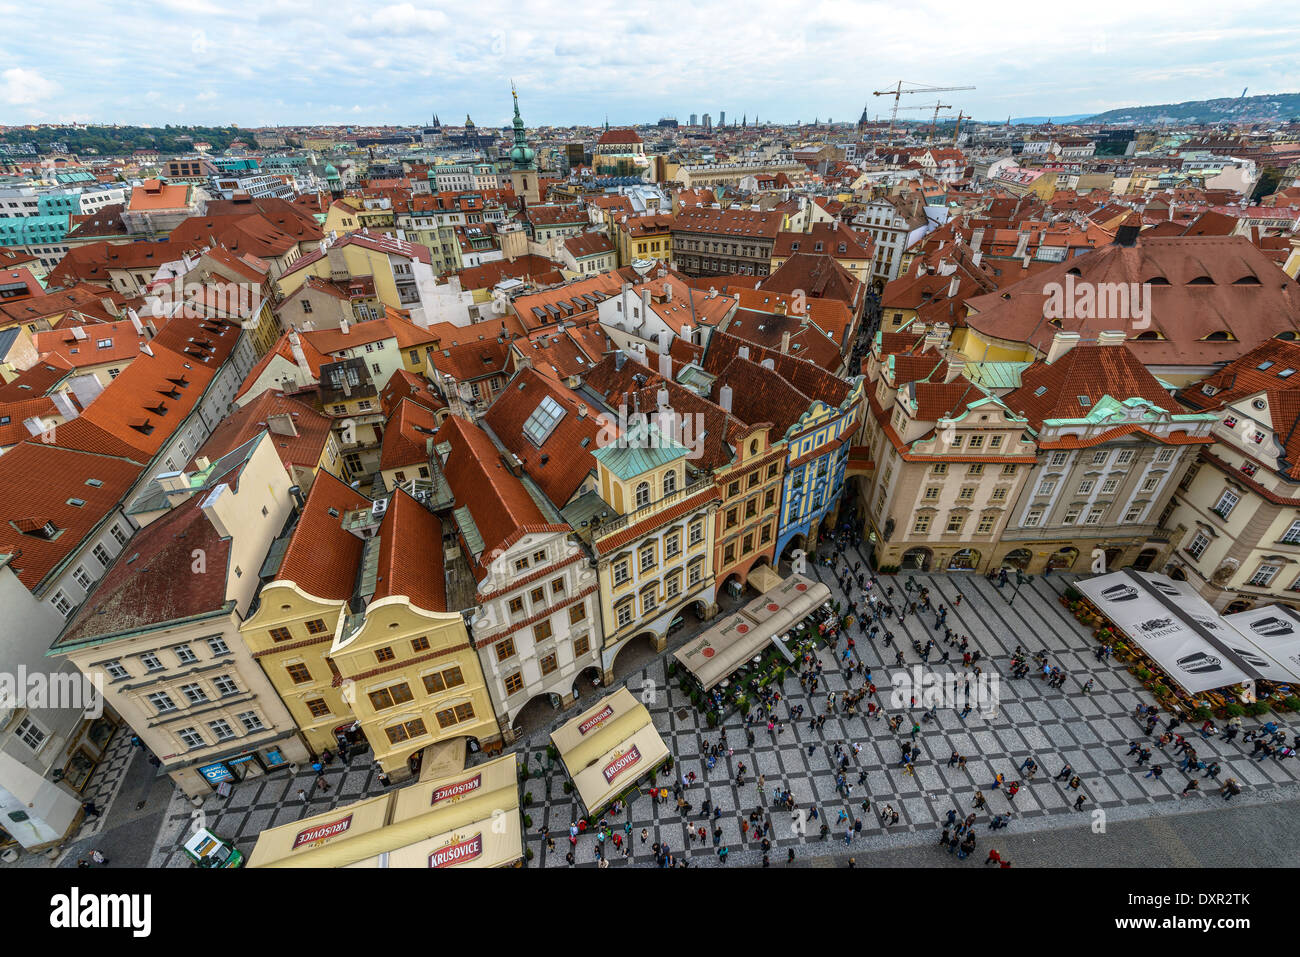 Prague - September 21: Old town square crowded with tourists on September 21, 2013 in Prague. Stock Photo